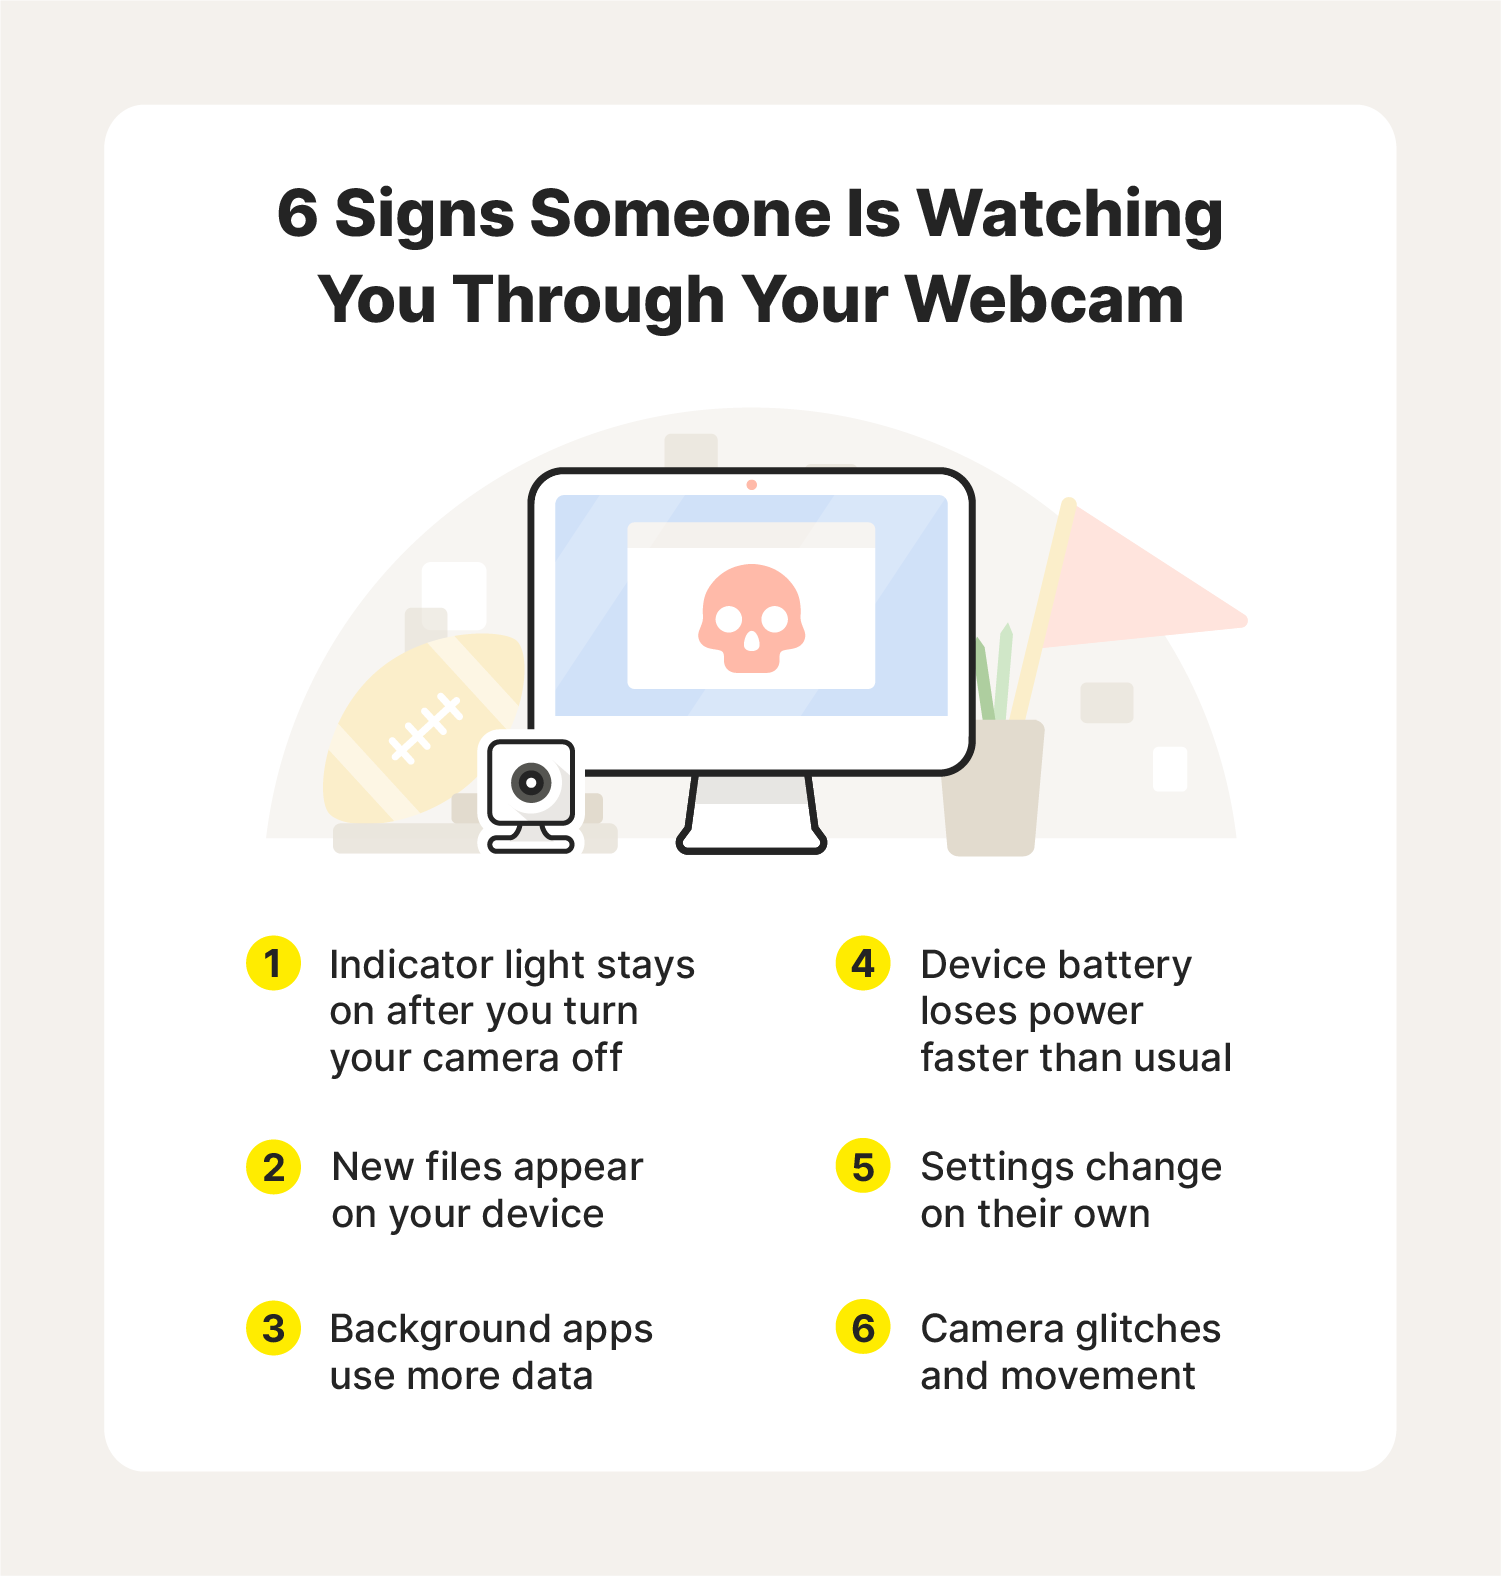 An image displays six warning signs that a cybercriminal is watching you through your webcam. 